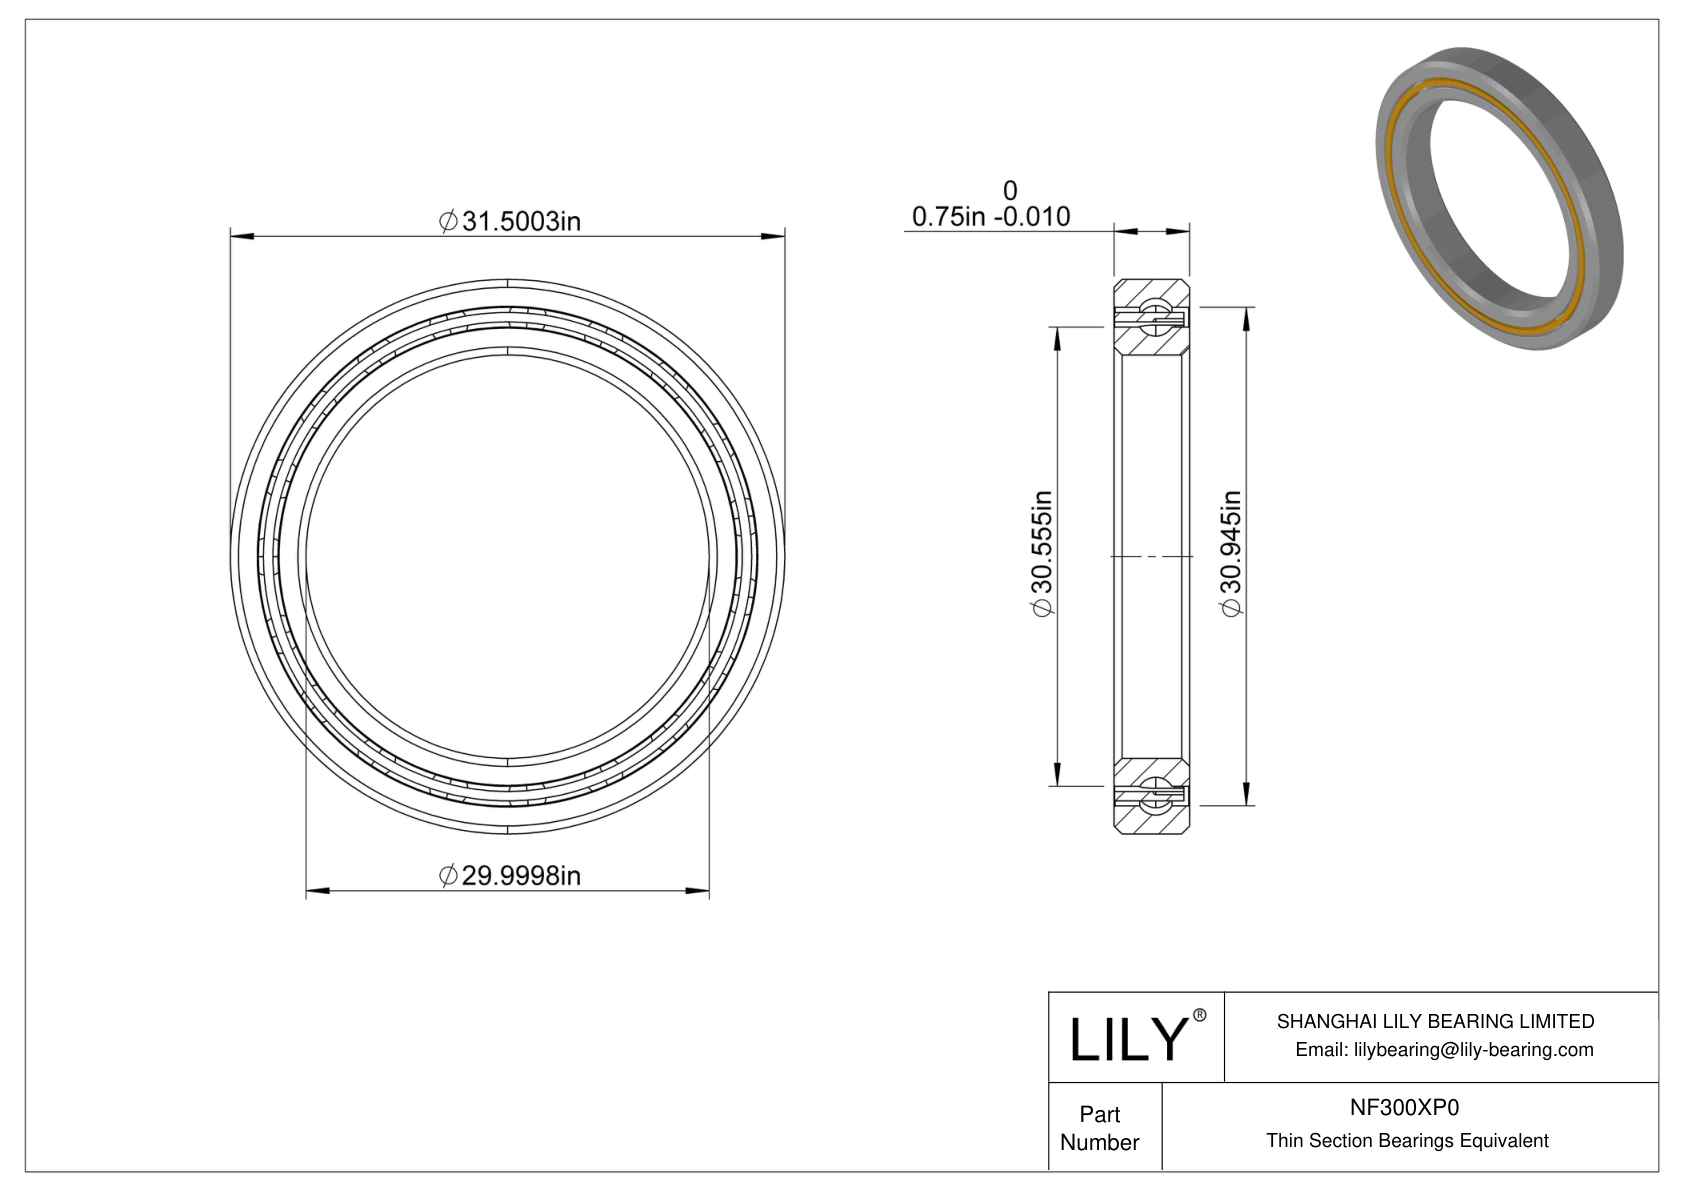 NF300XP0 Constant Section (CS) Bearings cad drawing